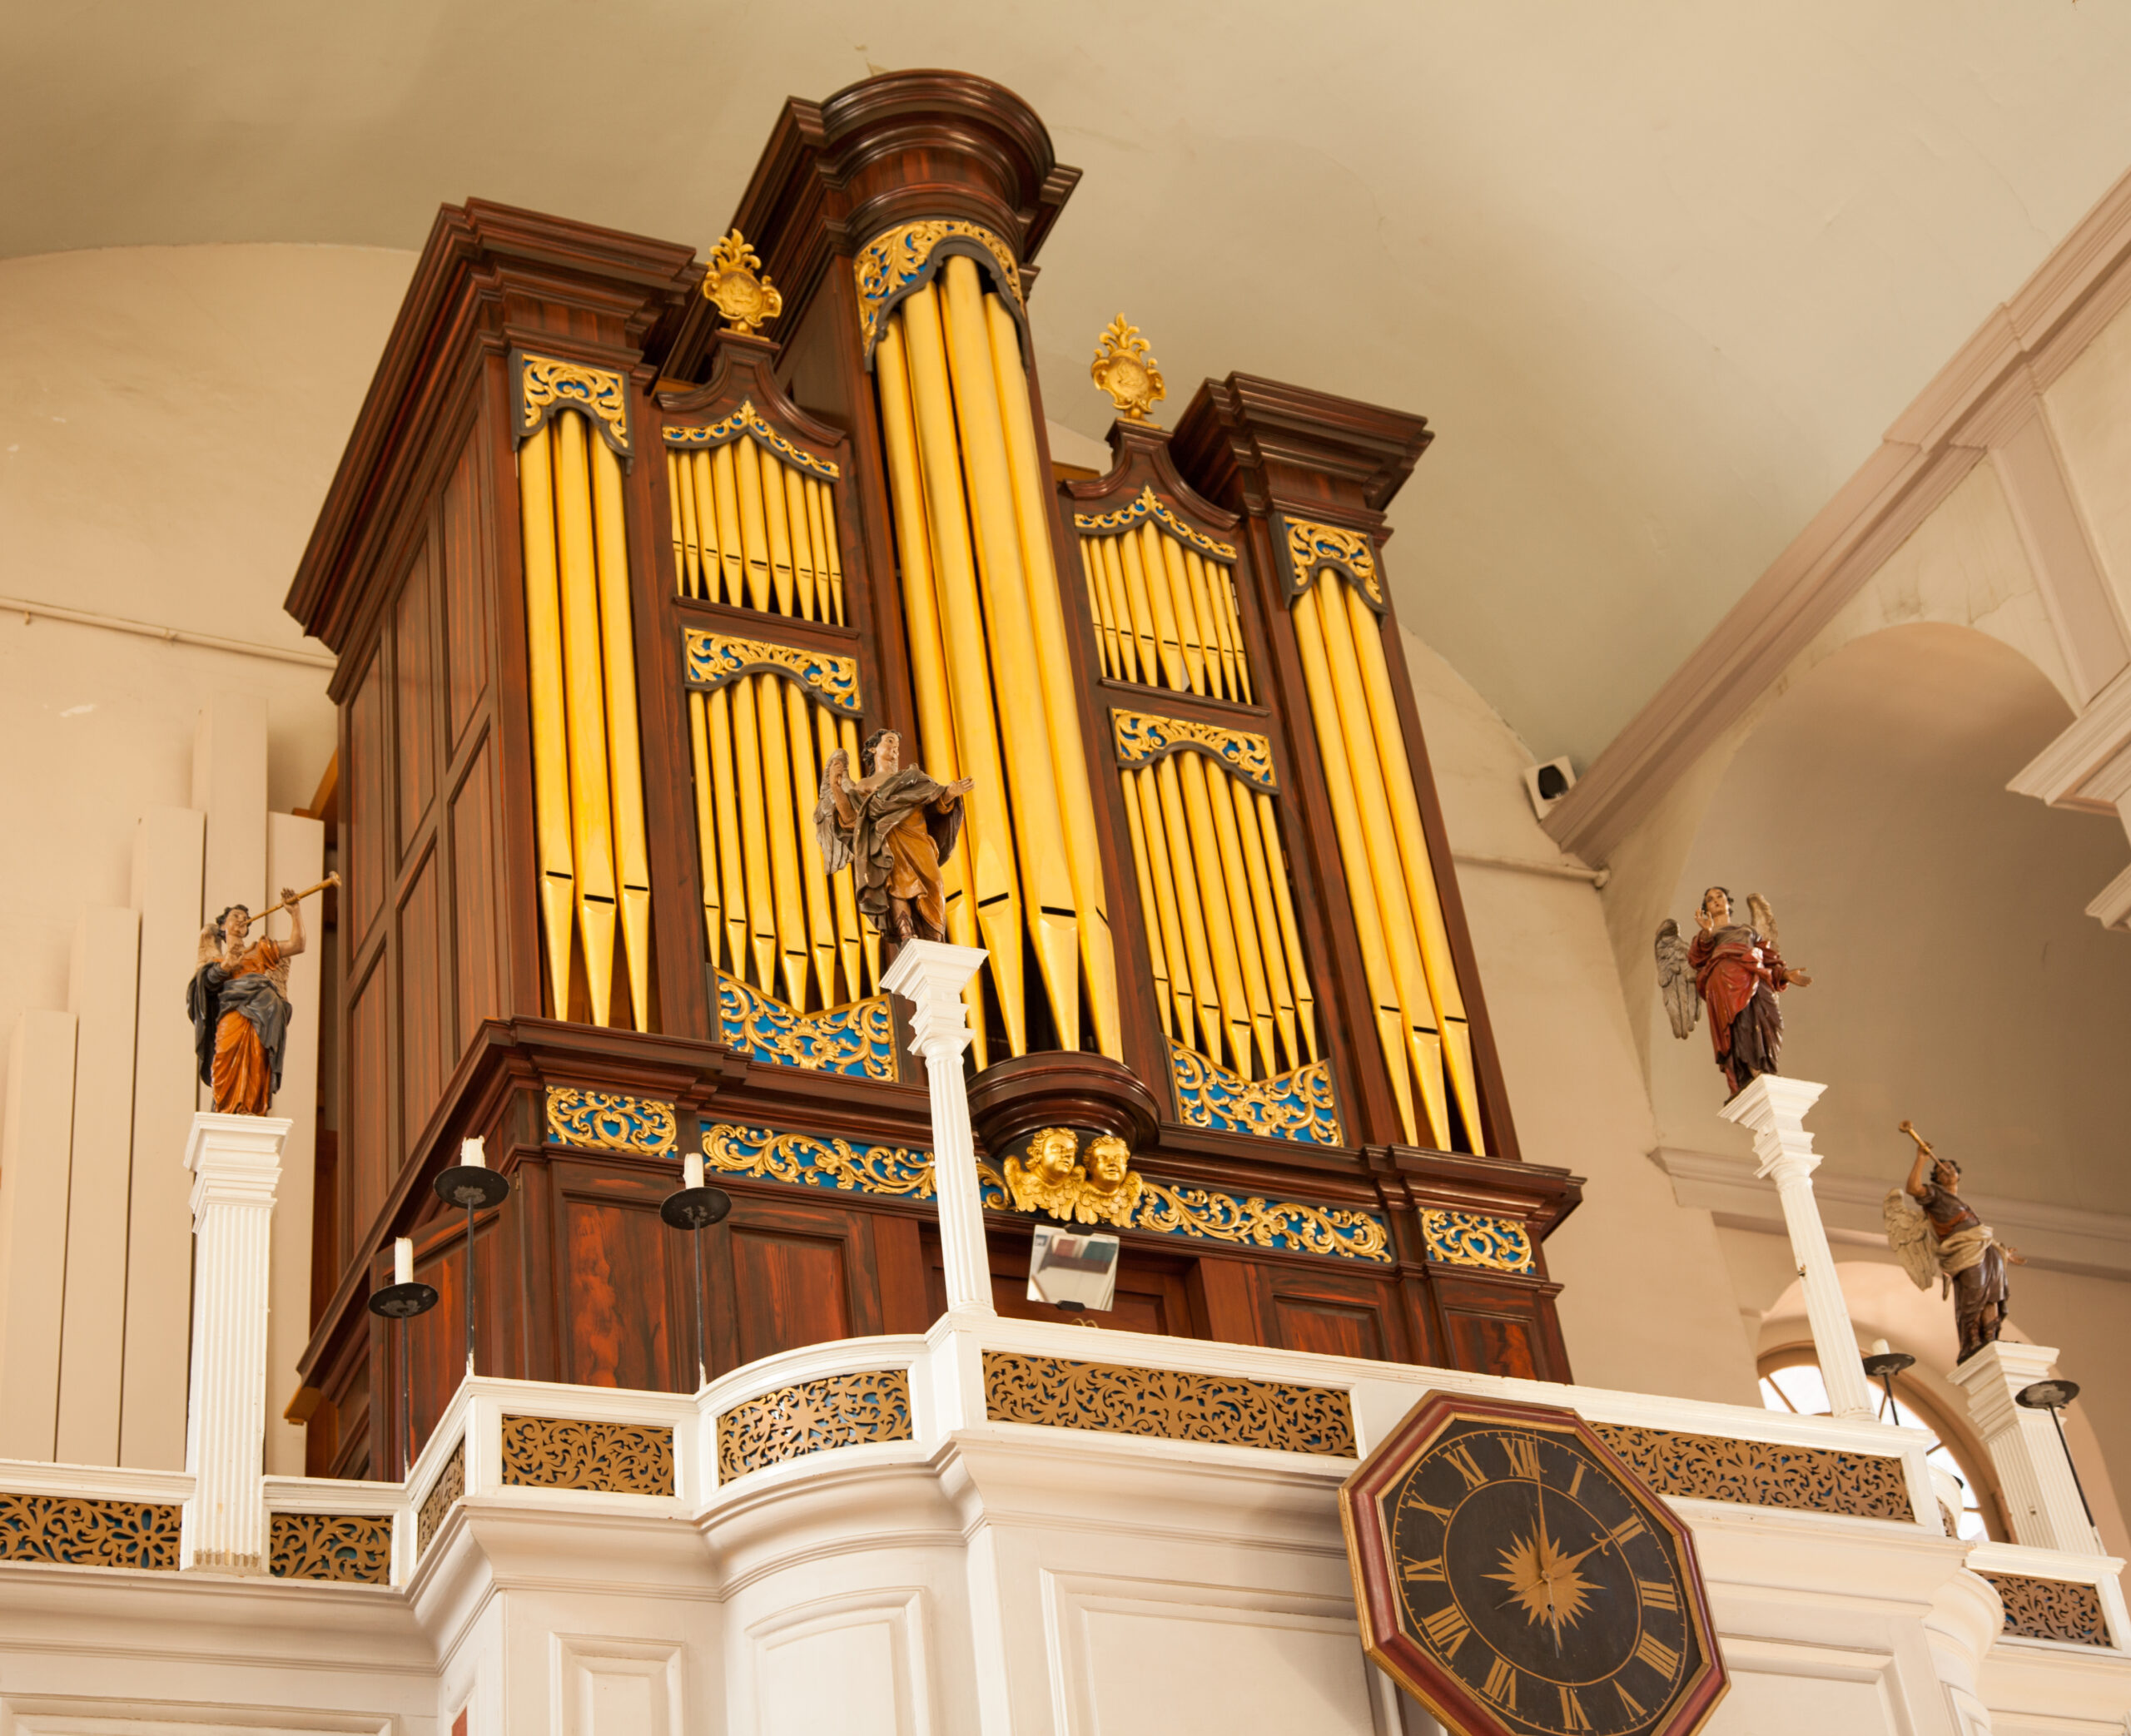 The pipe organ flanked by carved angels in the galley of the Old North Church.